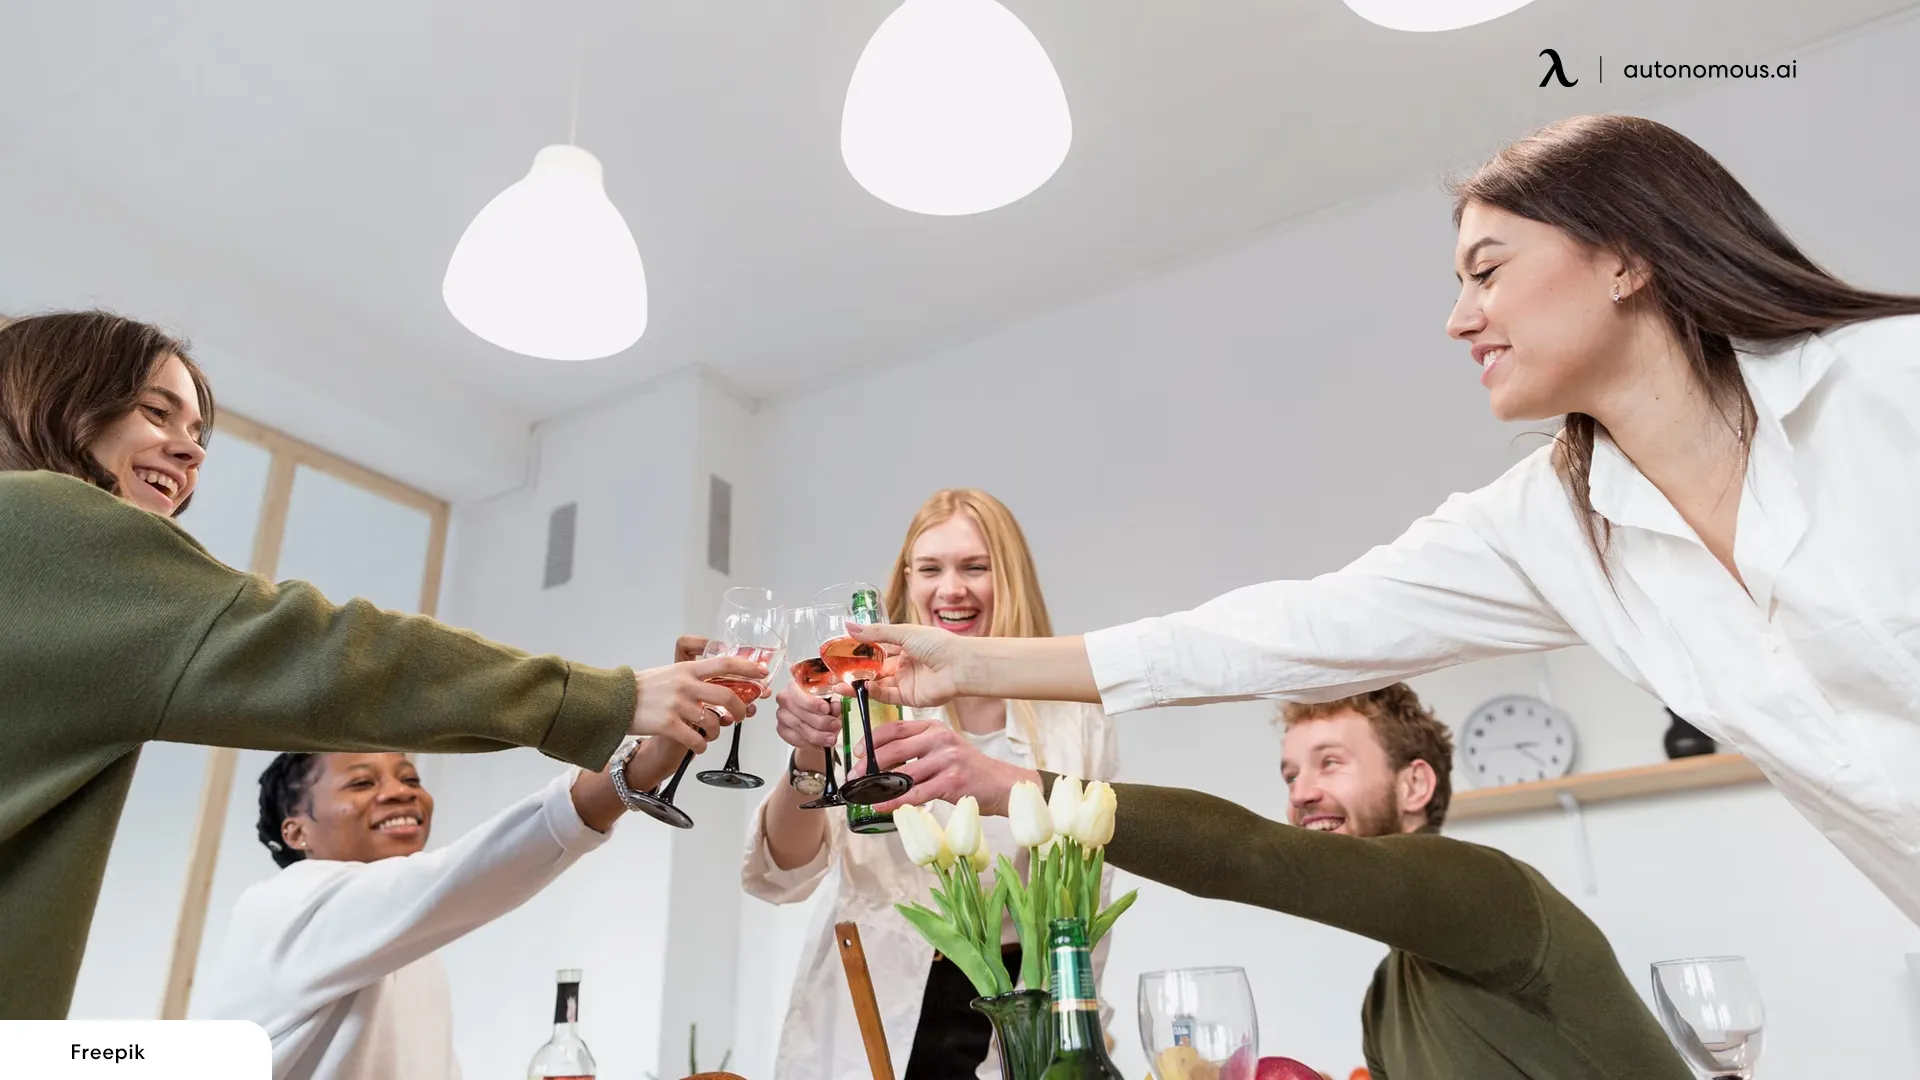 Why Should You Throw a Labor Day Office Party?